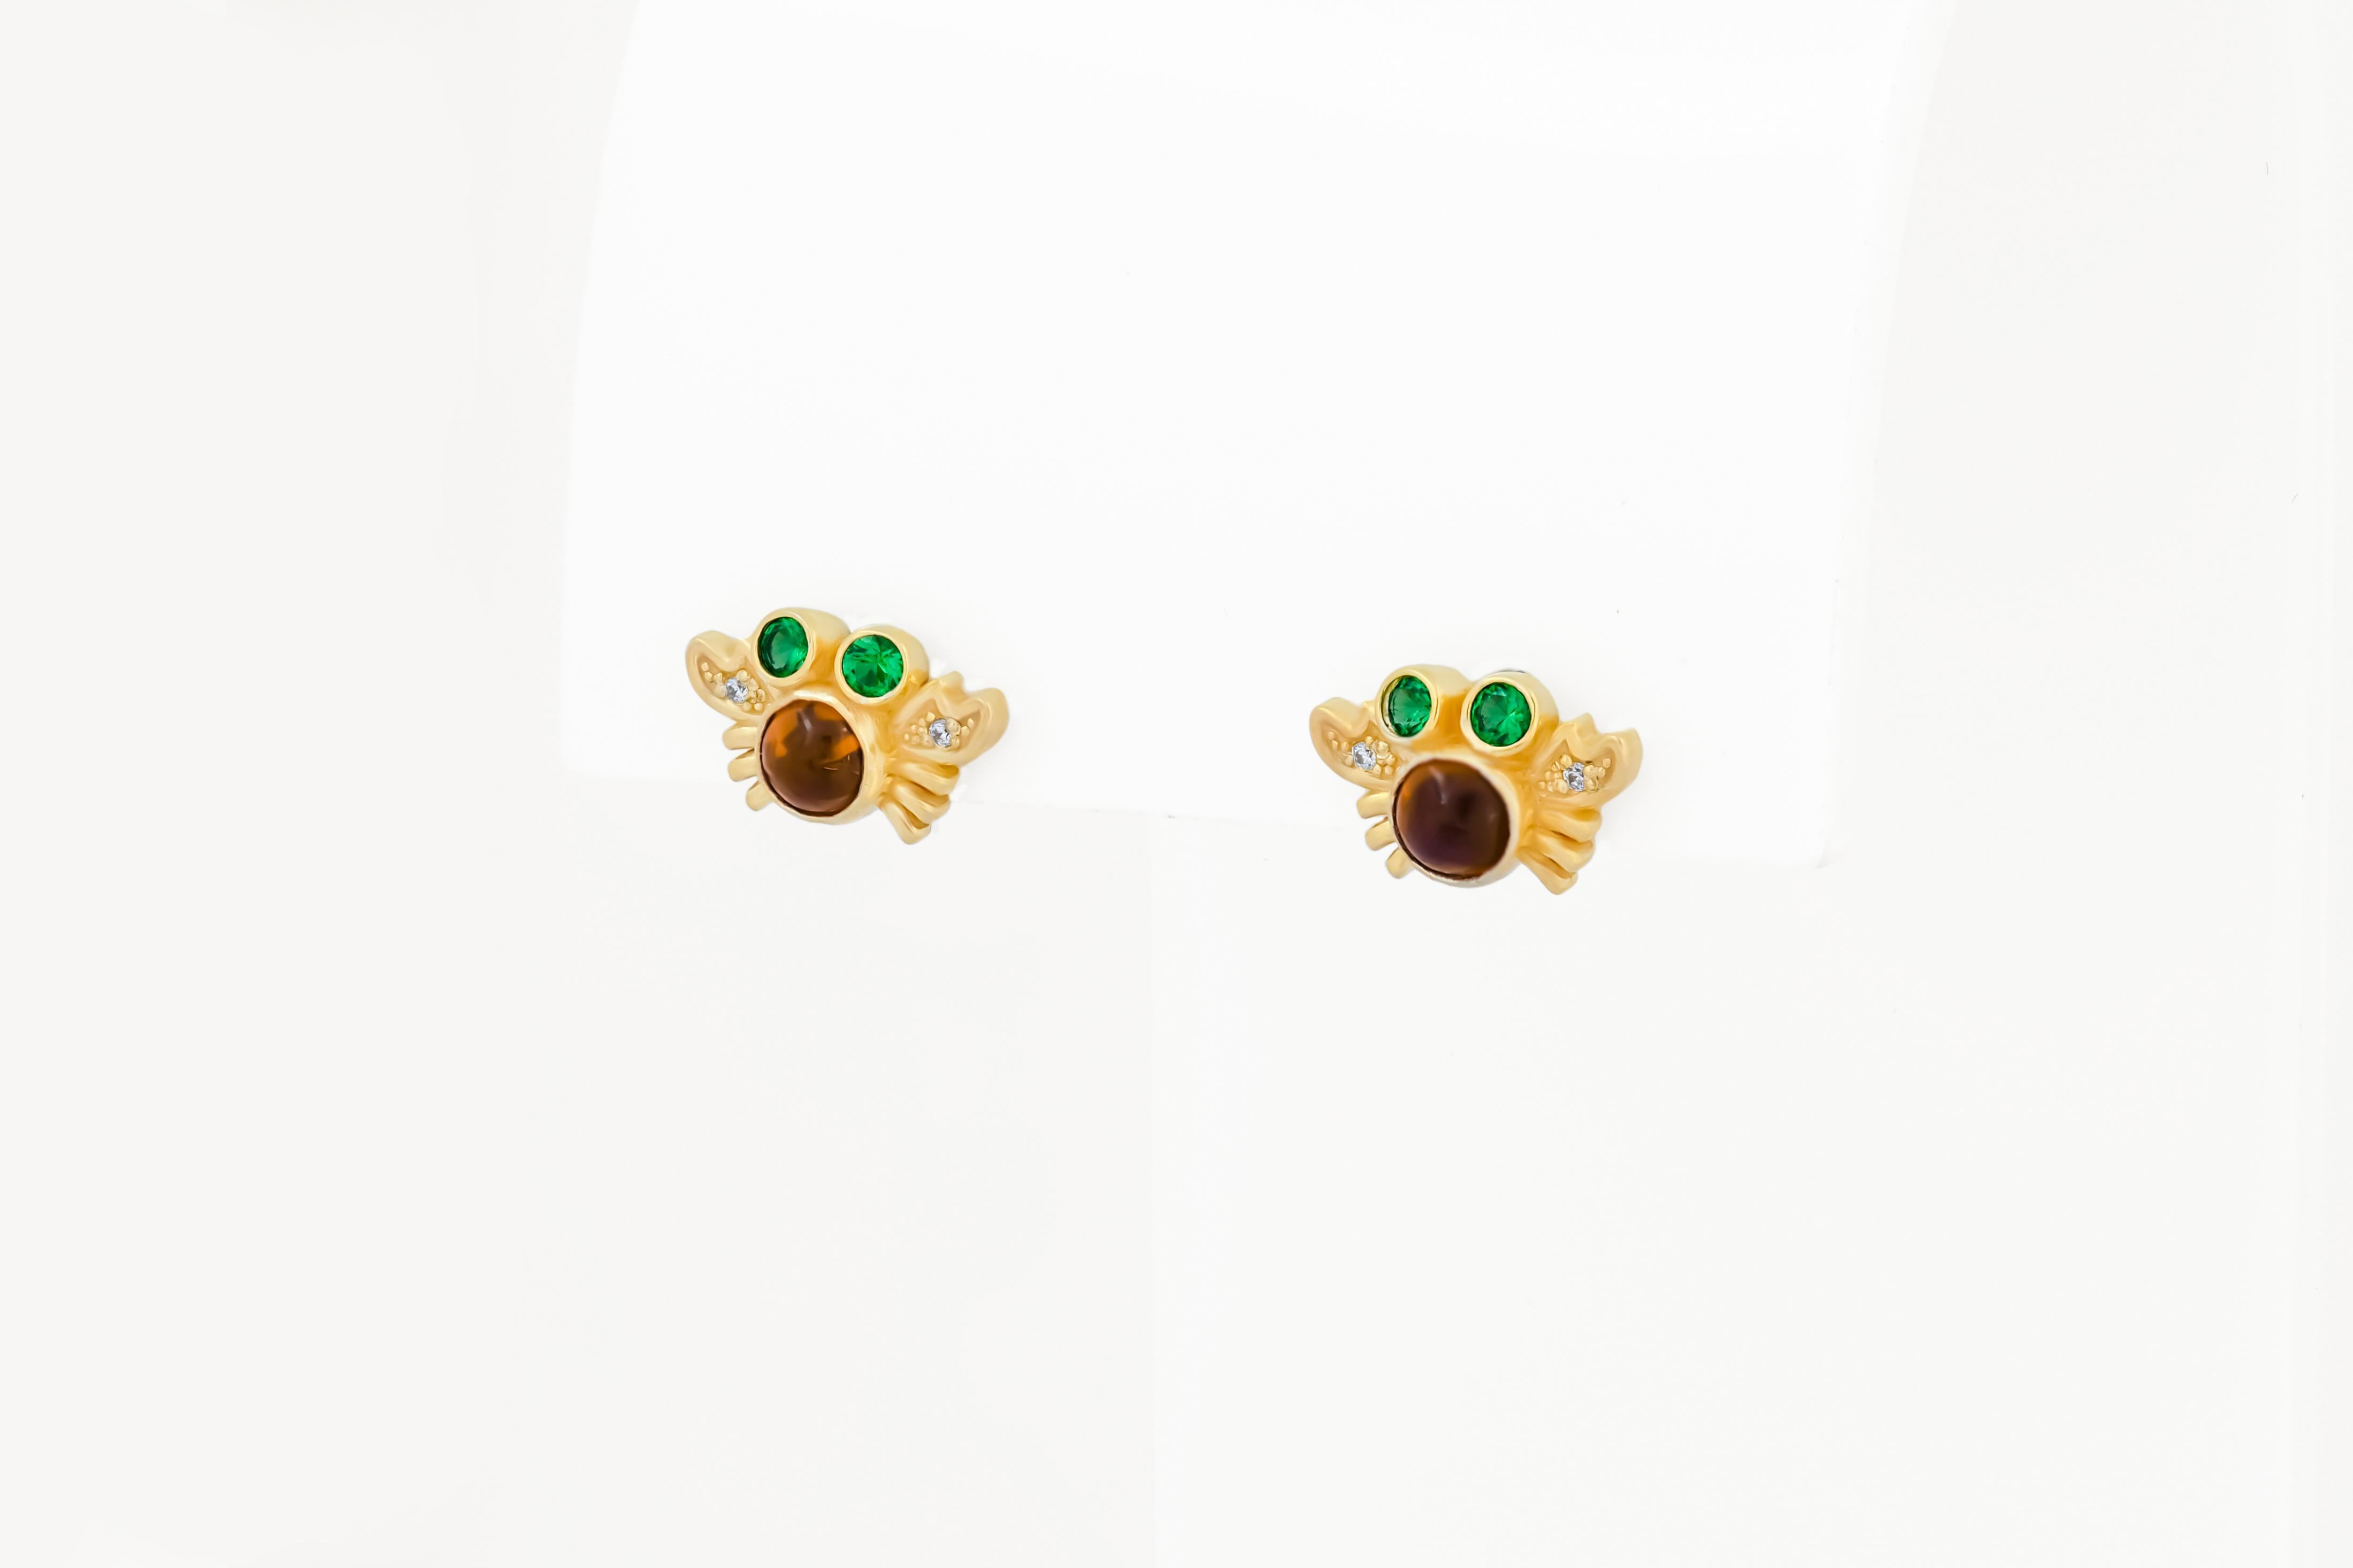 3 pair of earrings studs:  Fish, crab and flower  4